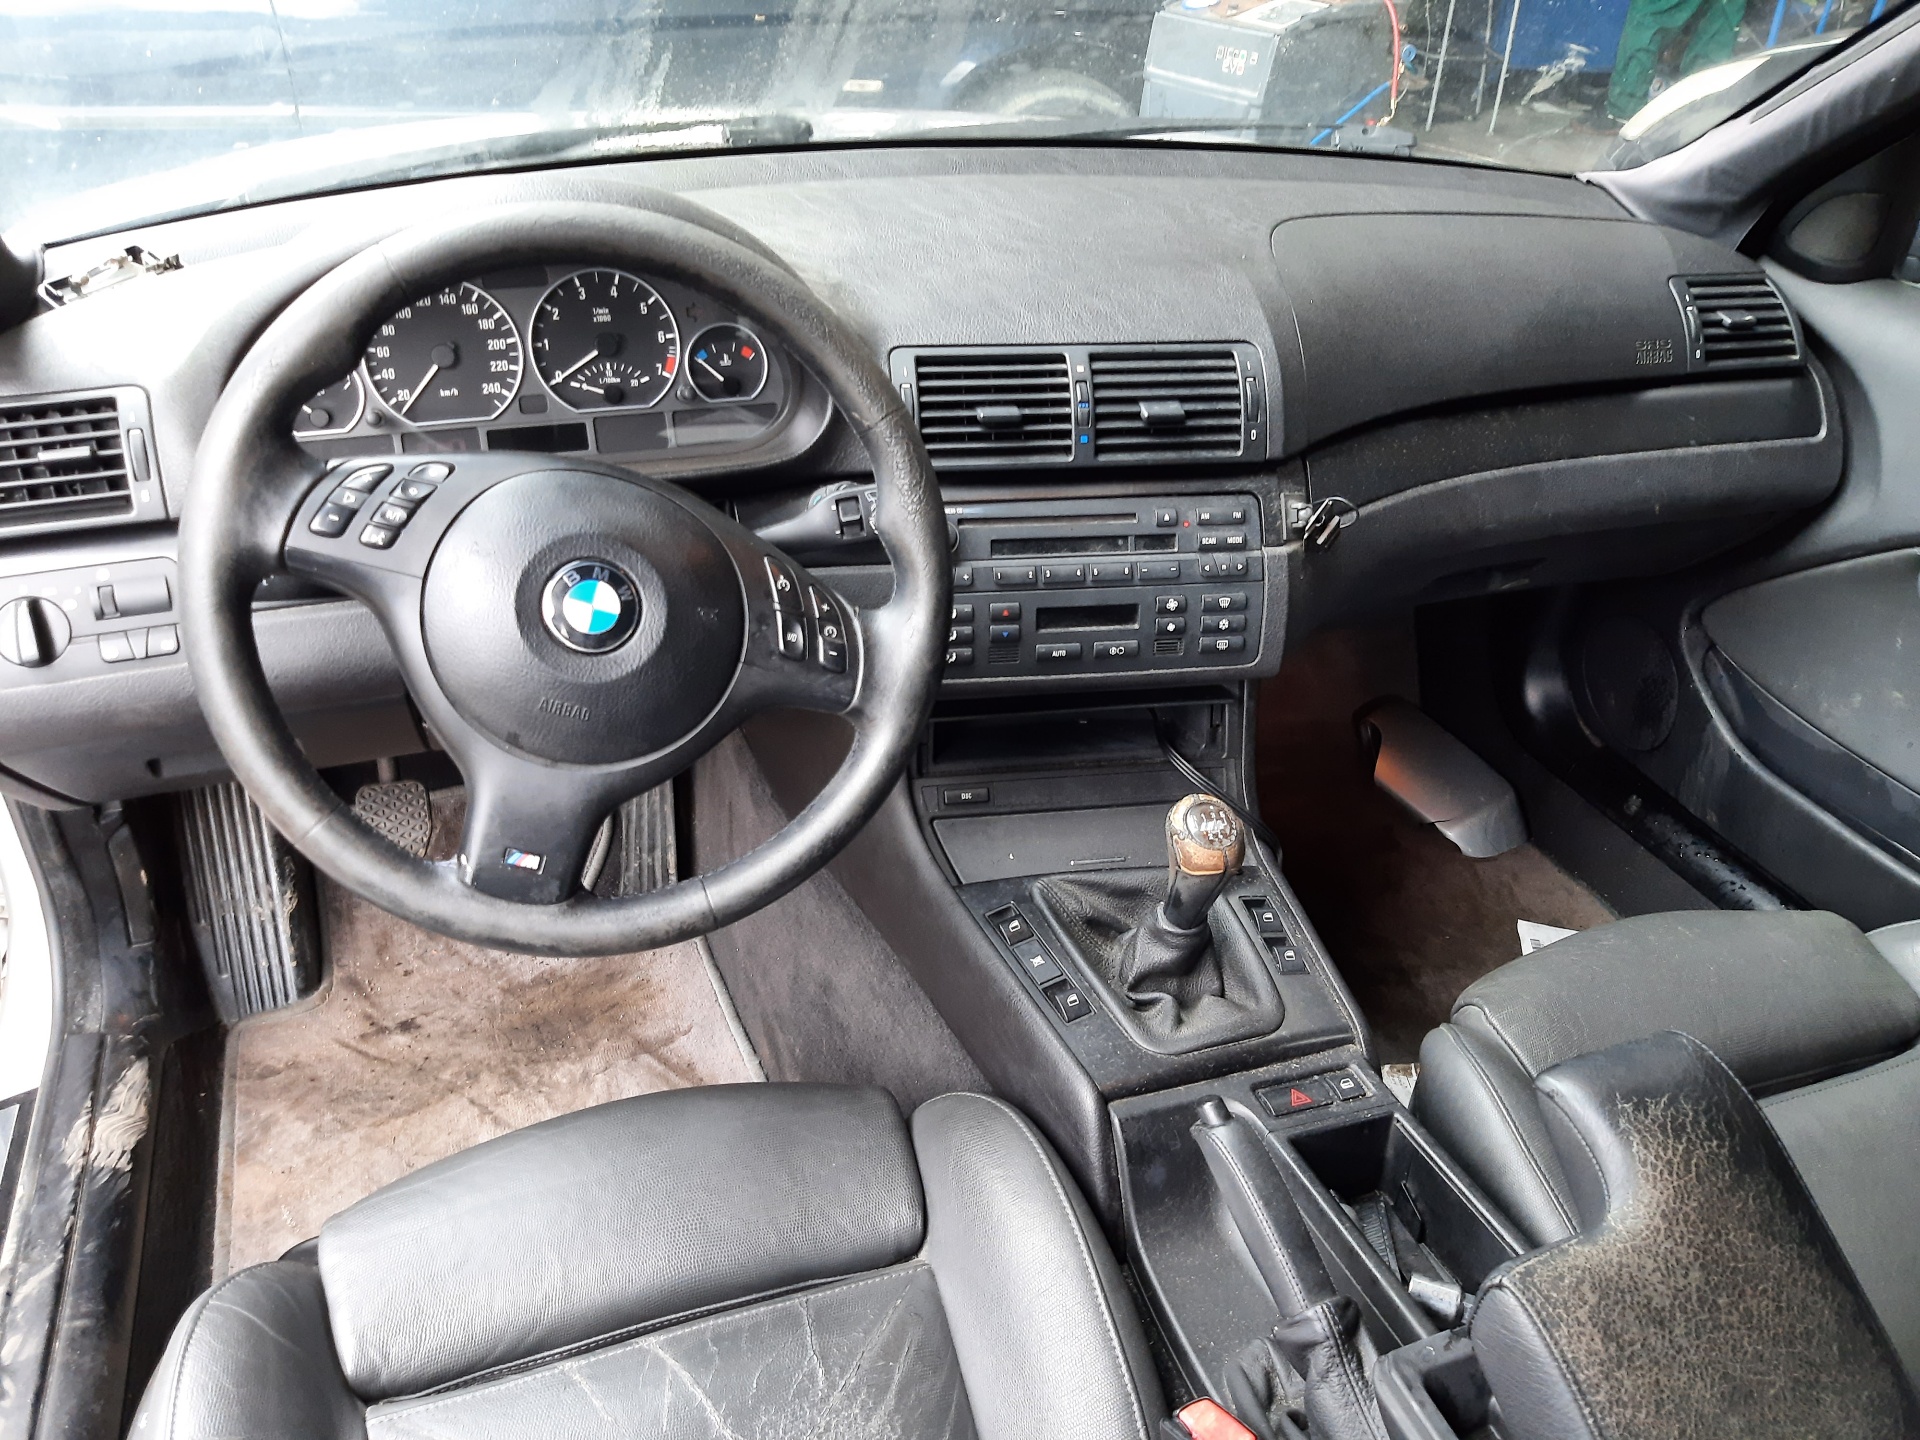 BMW 3 Series E46 (1997-2006) Rear Right Door Window Control Switch 6902174 22581878